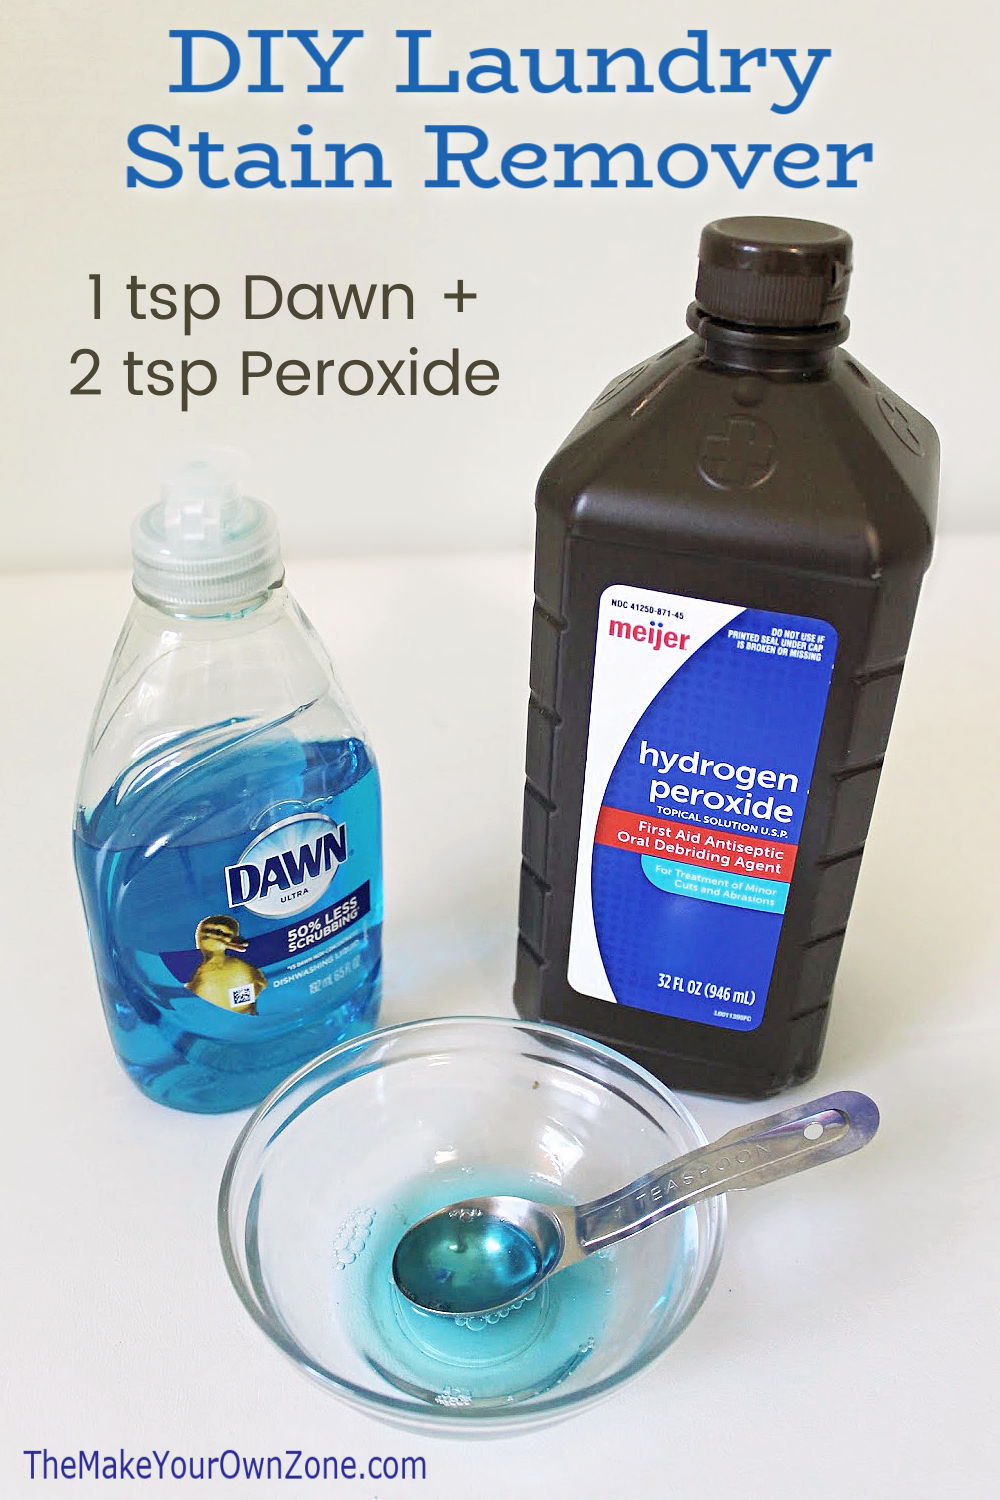 Dawn dish soap and hydrogen peroxide combined to make DIY stain remover